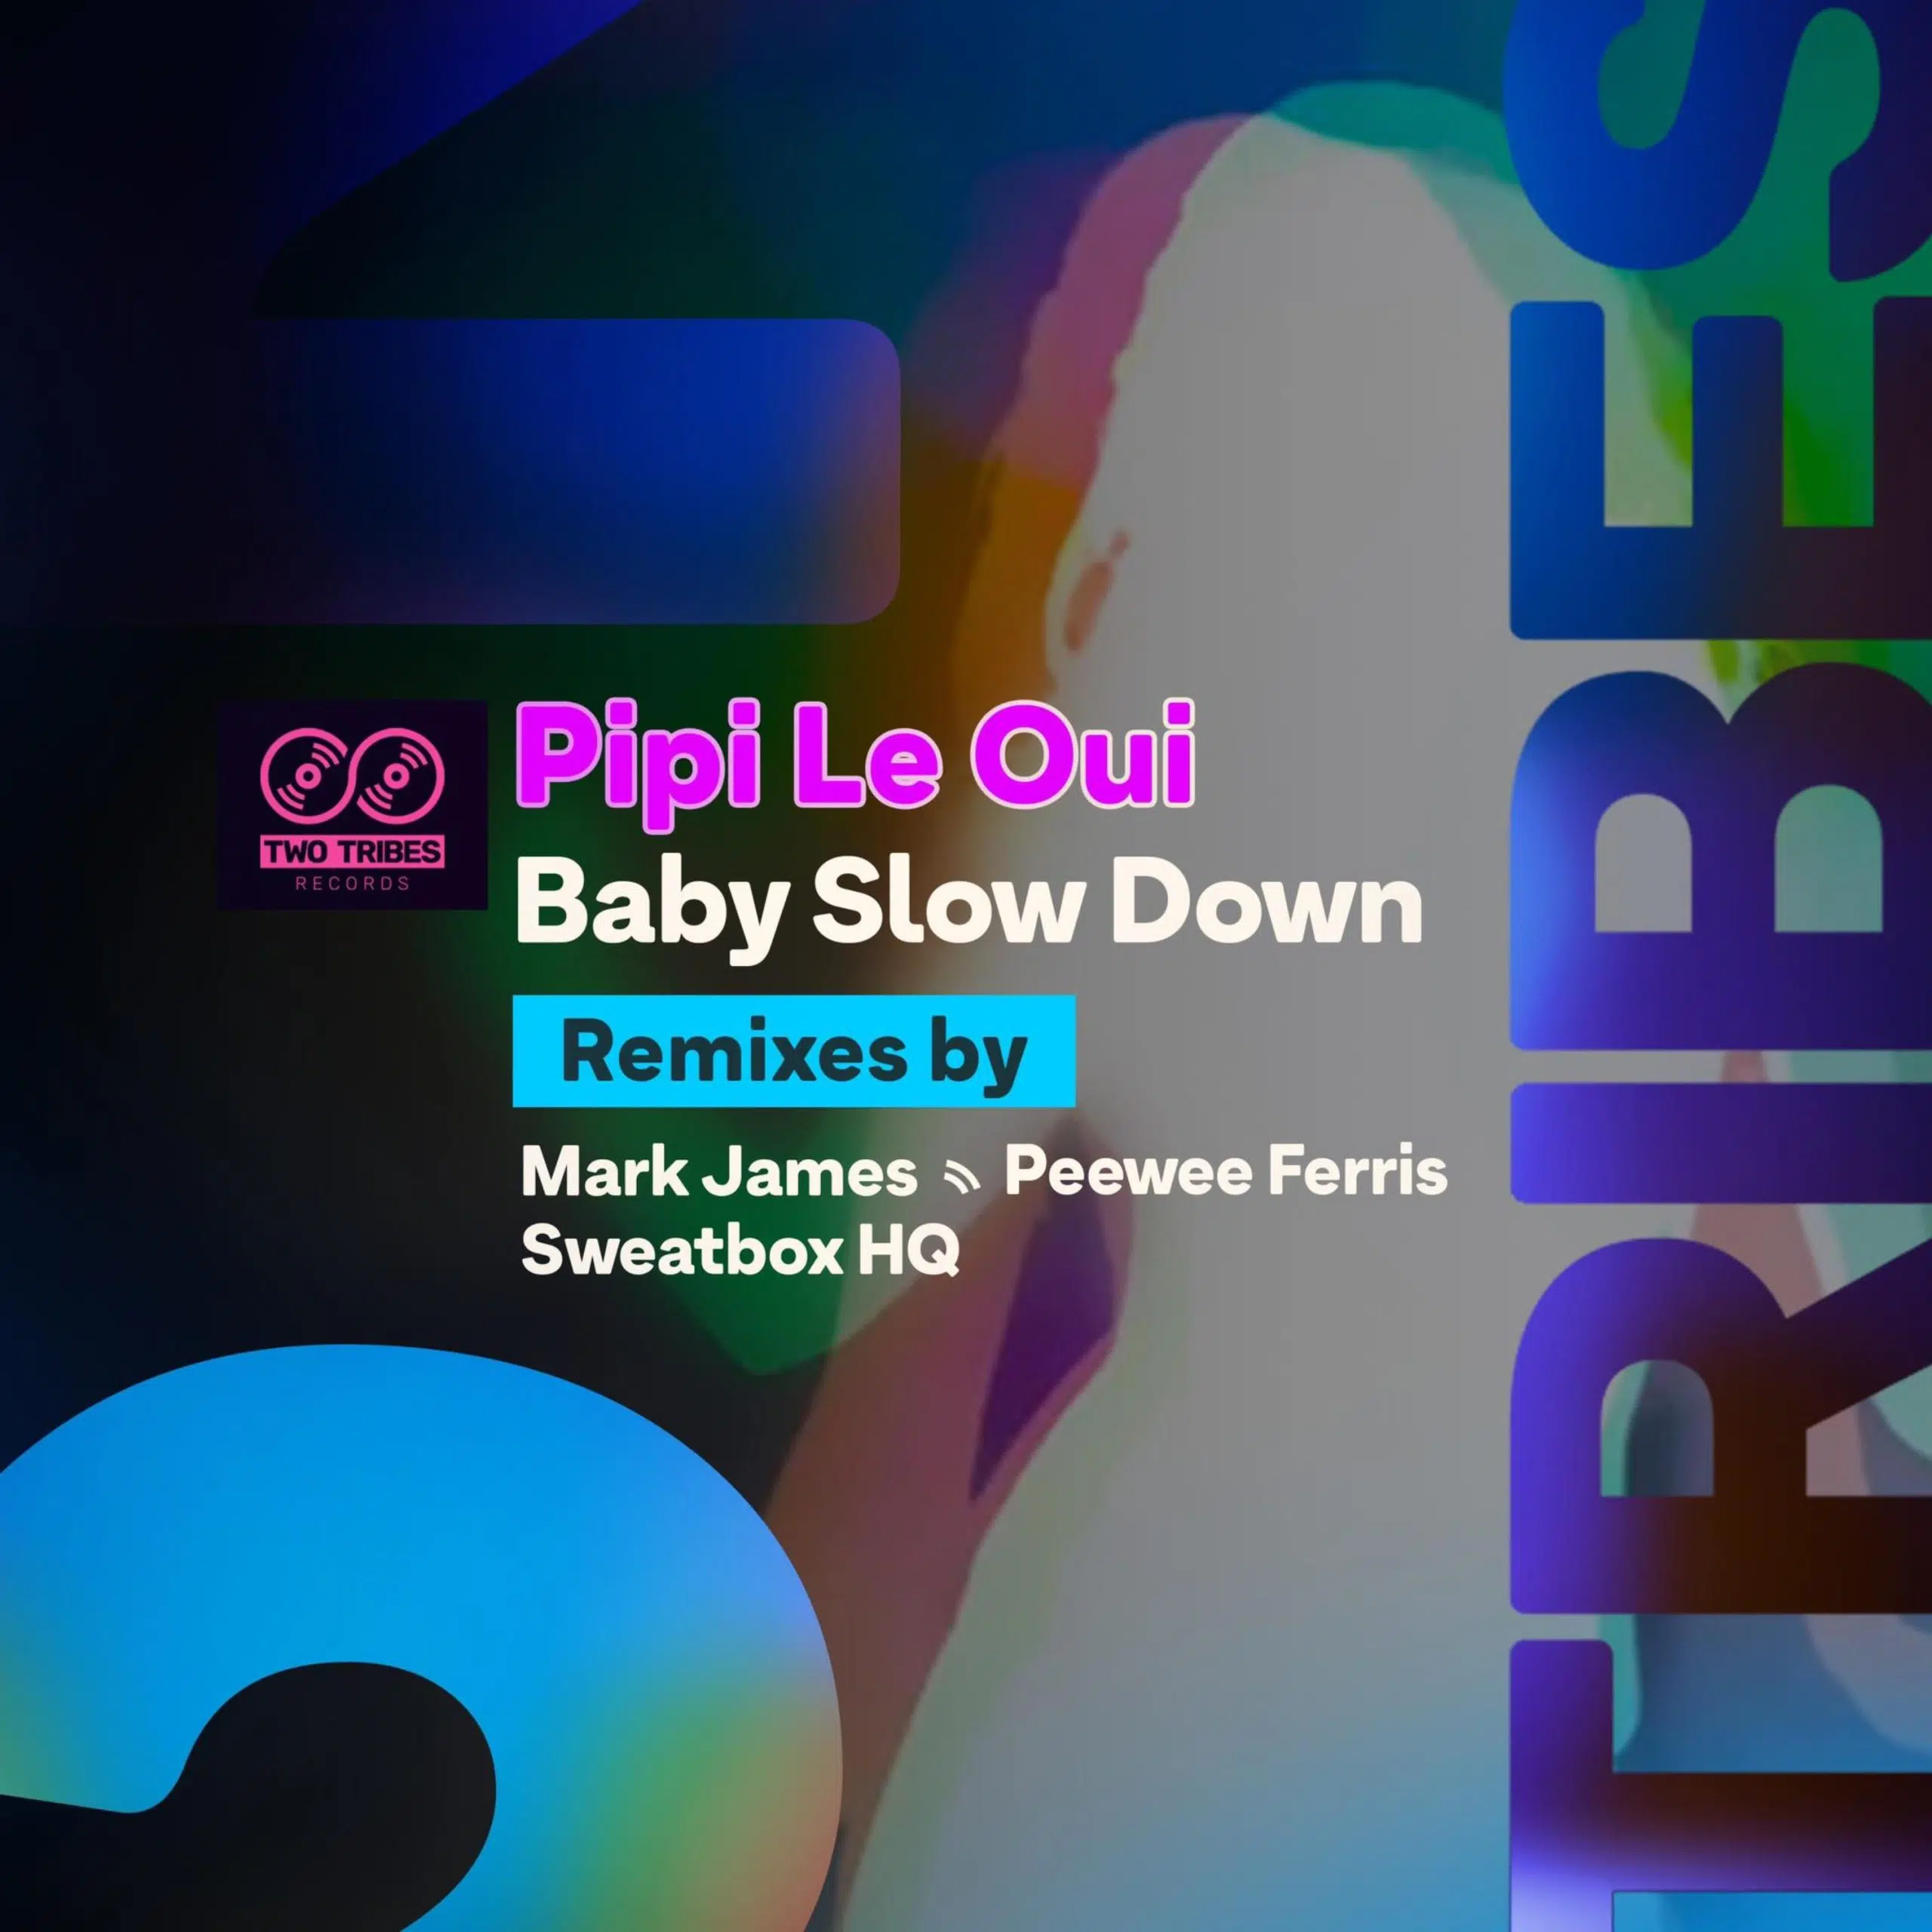 Pipi Le Oui “Baby Slow Down”